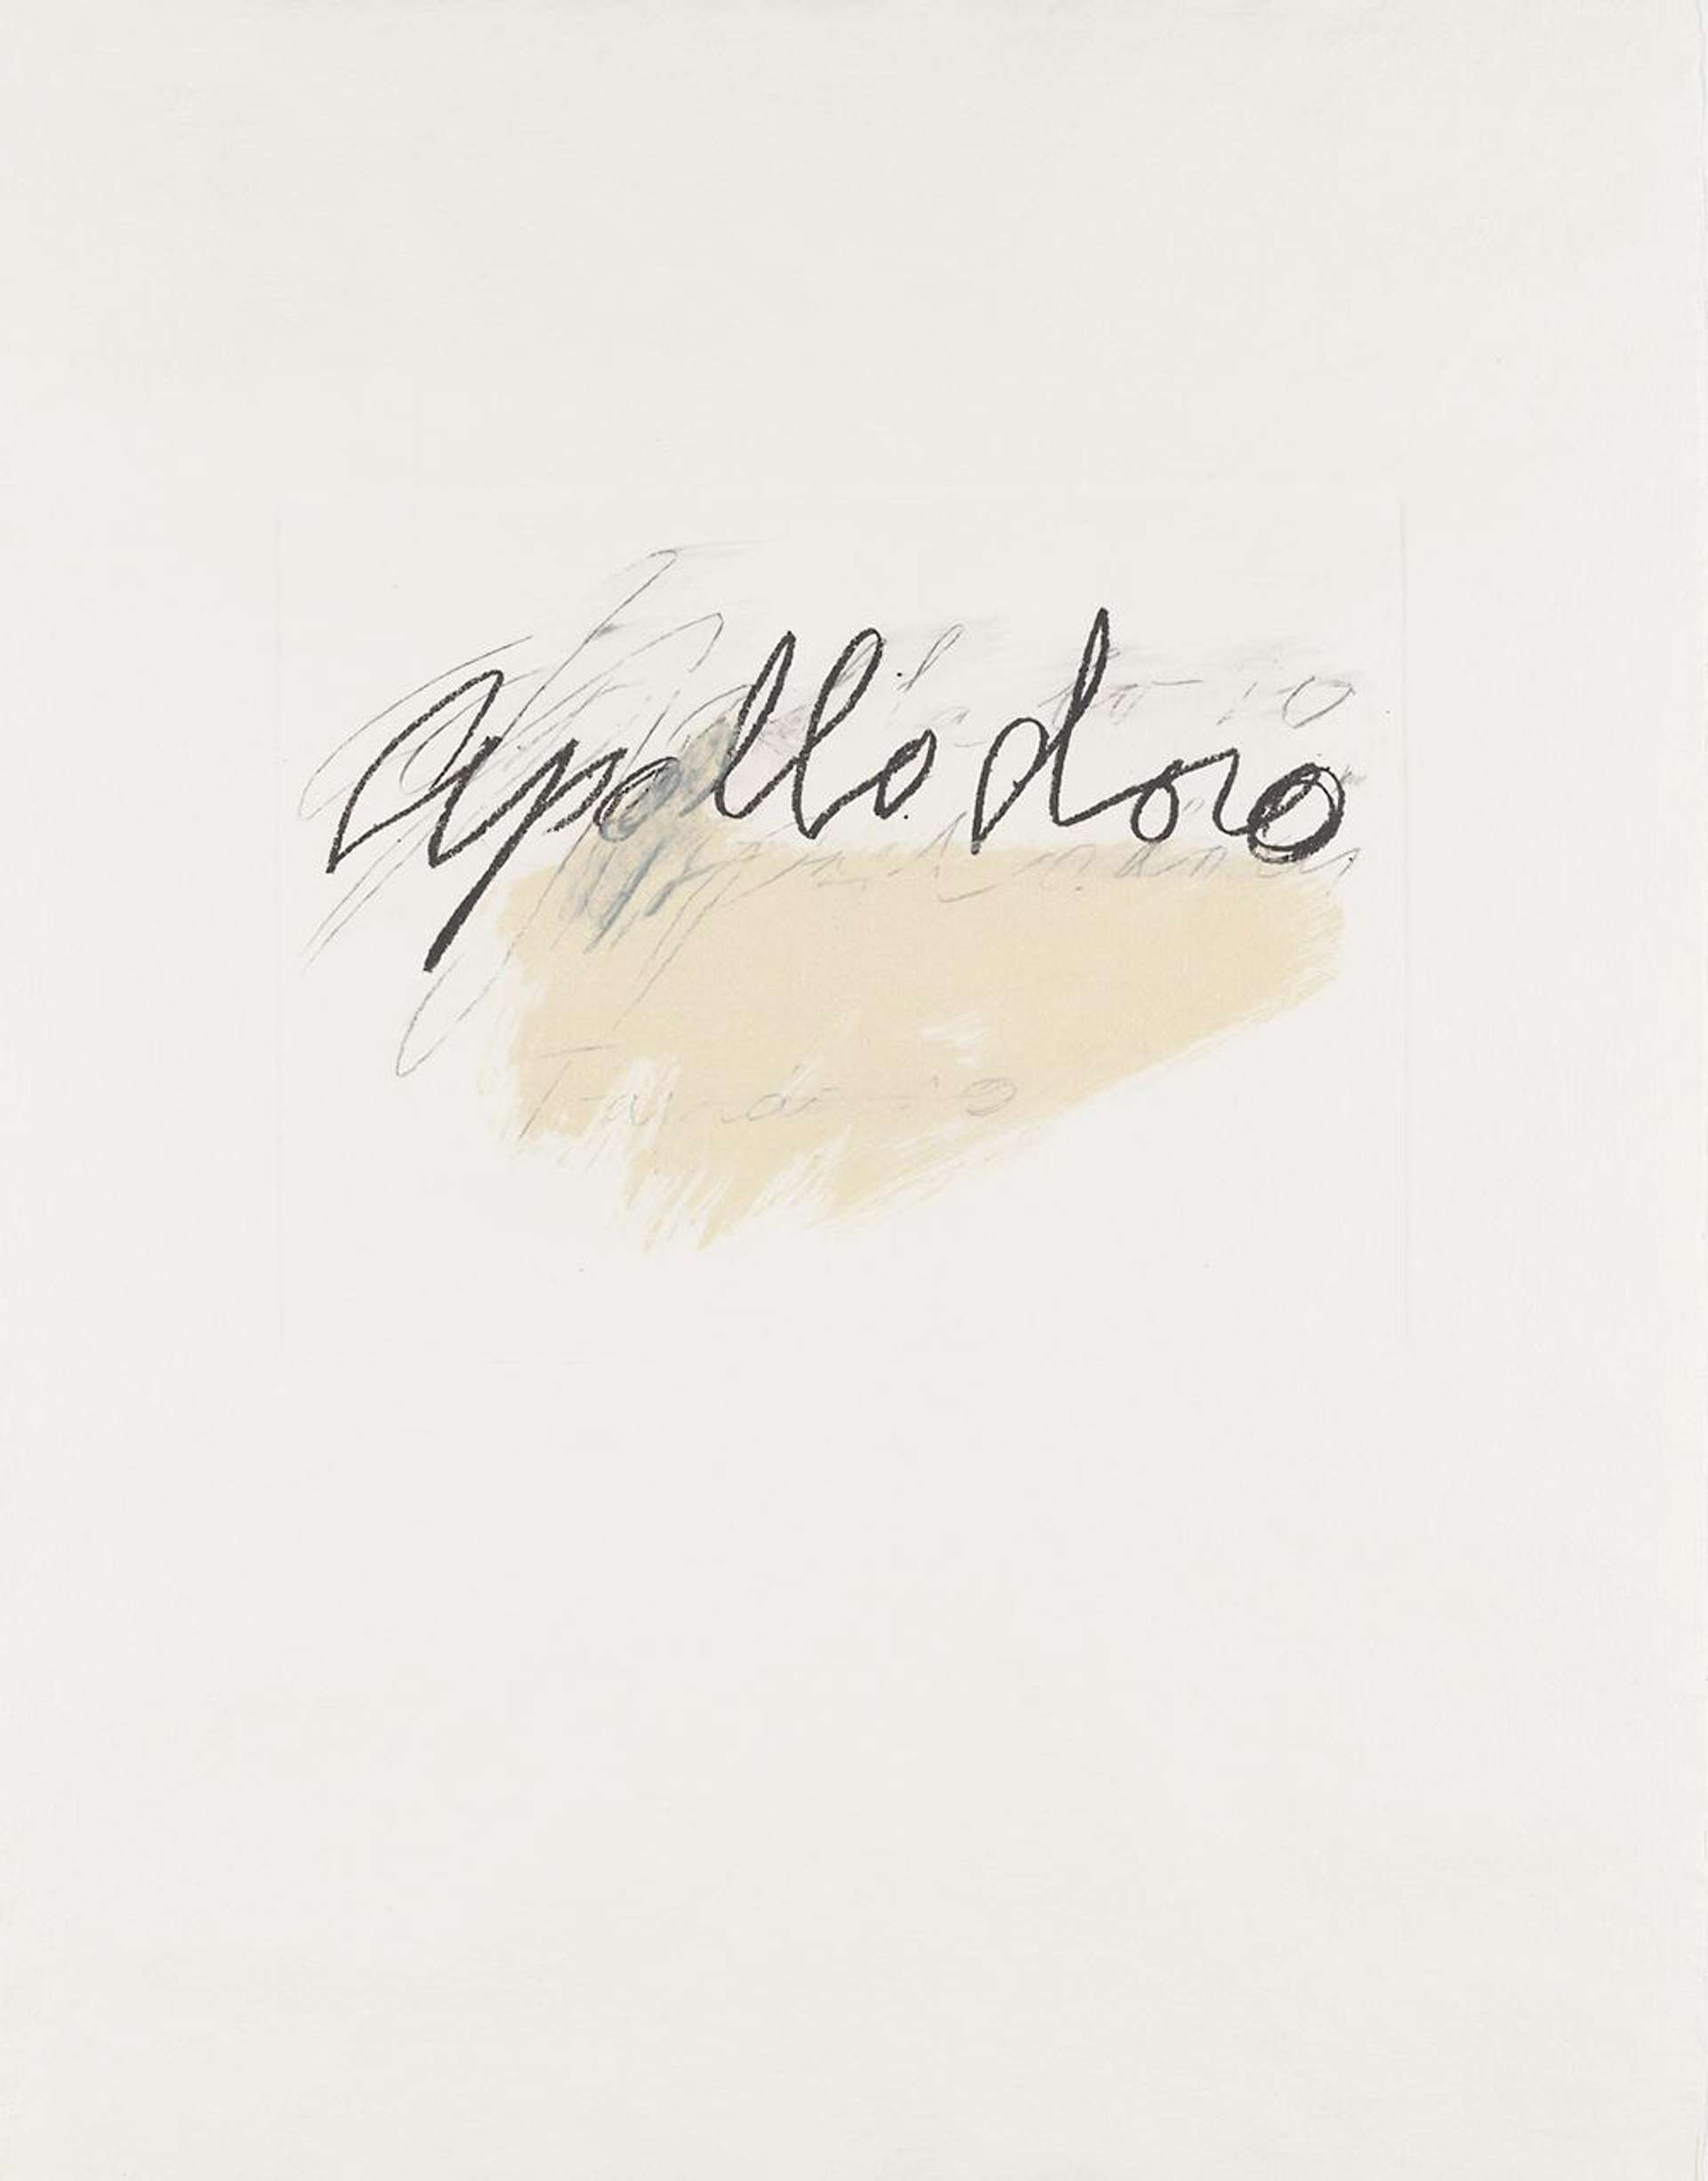 Apollodoro - Signed Print by Cy Twombly 1975 - MyArtBroker